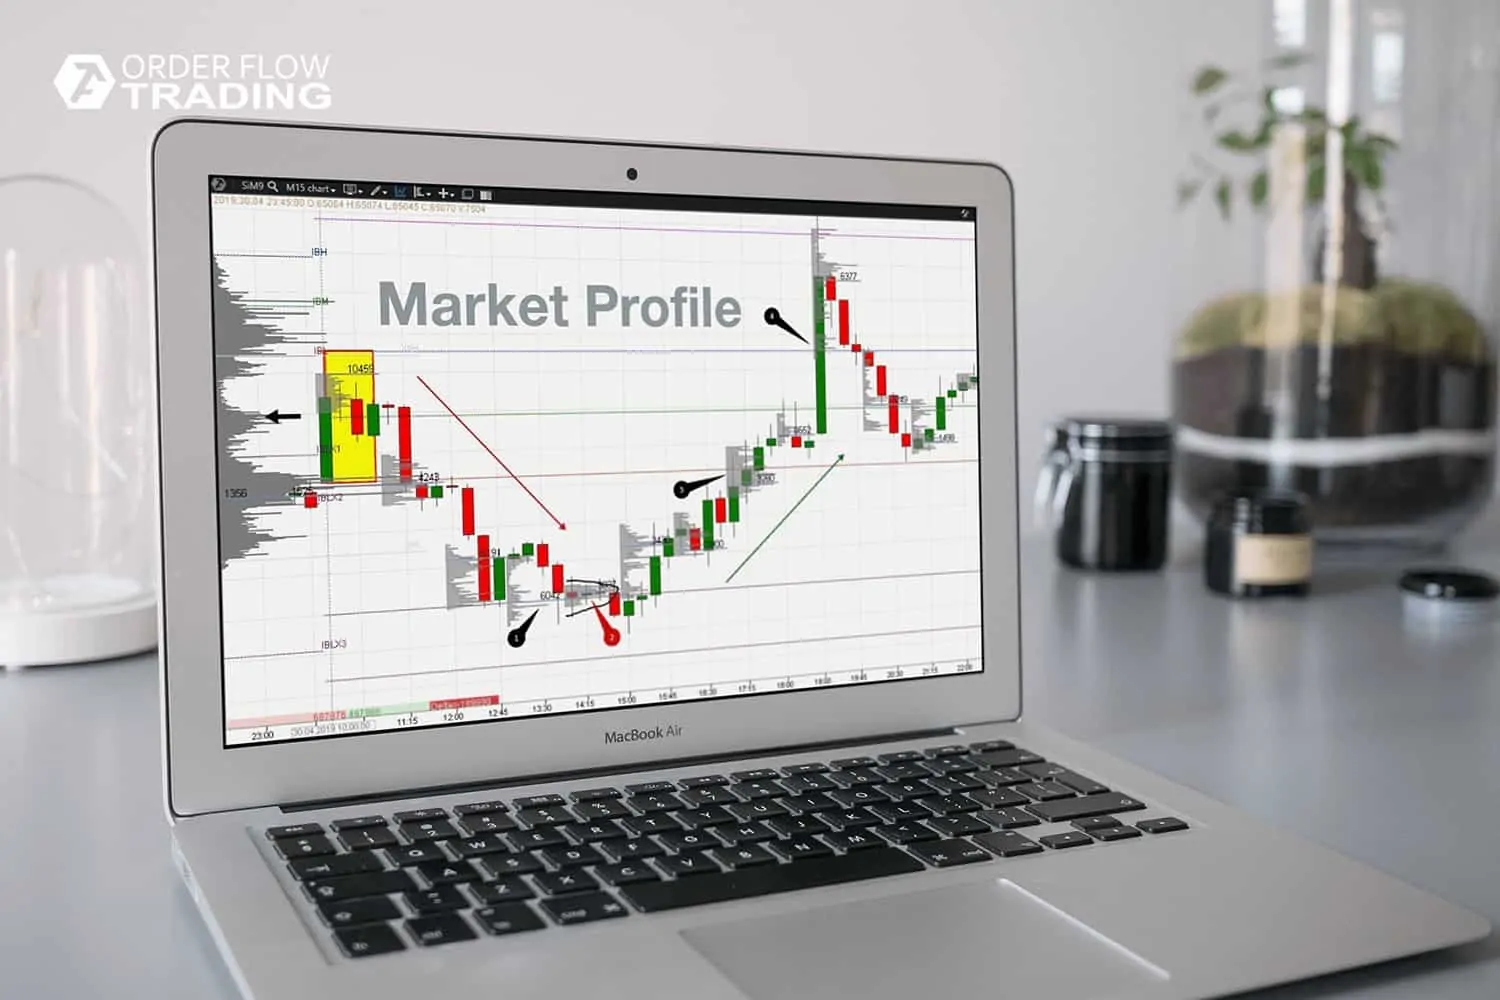 How to improve trading using the Market Profile